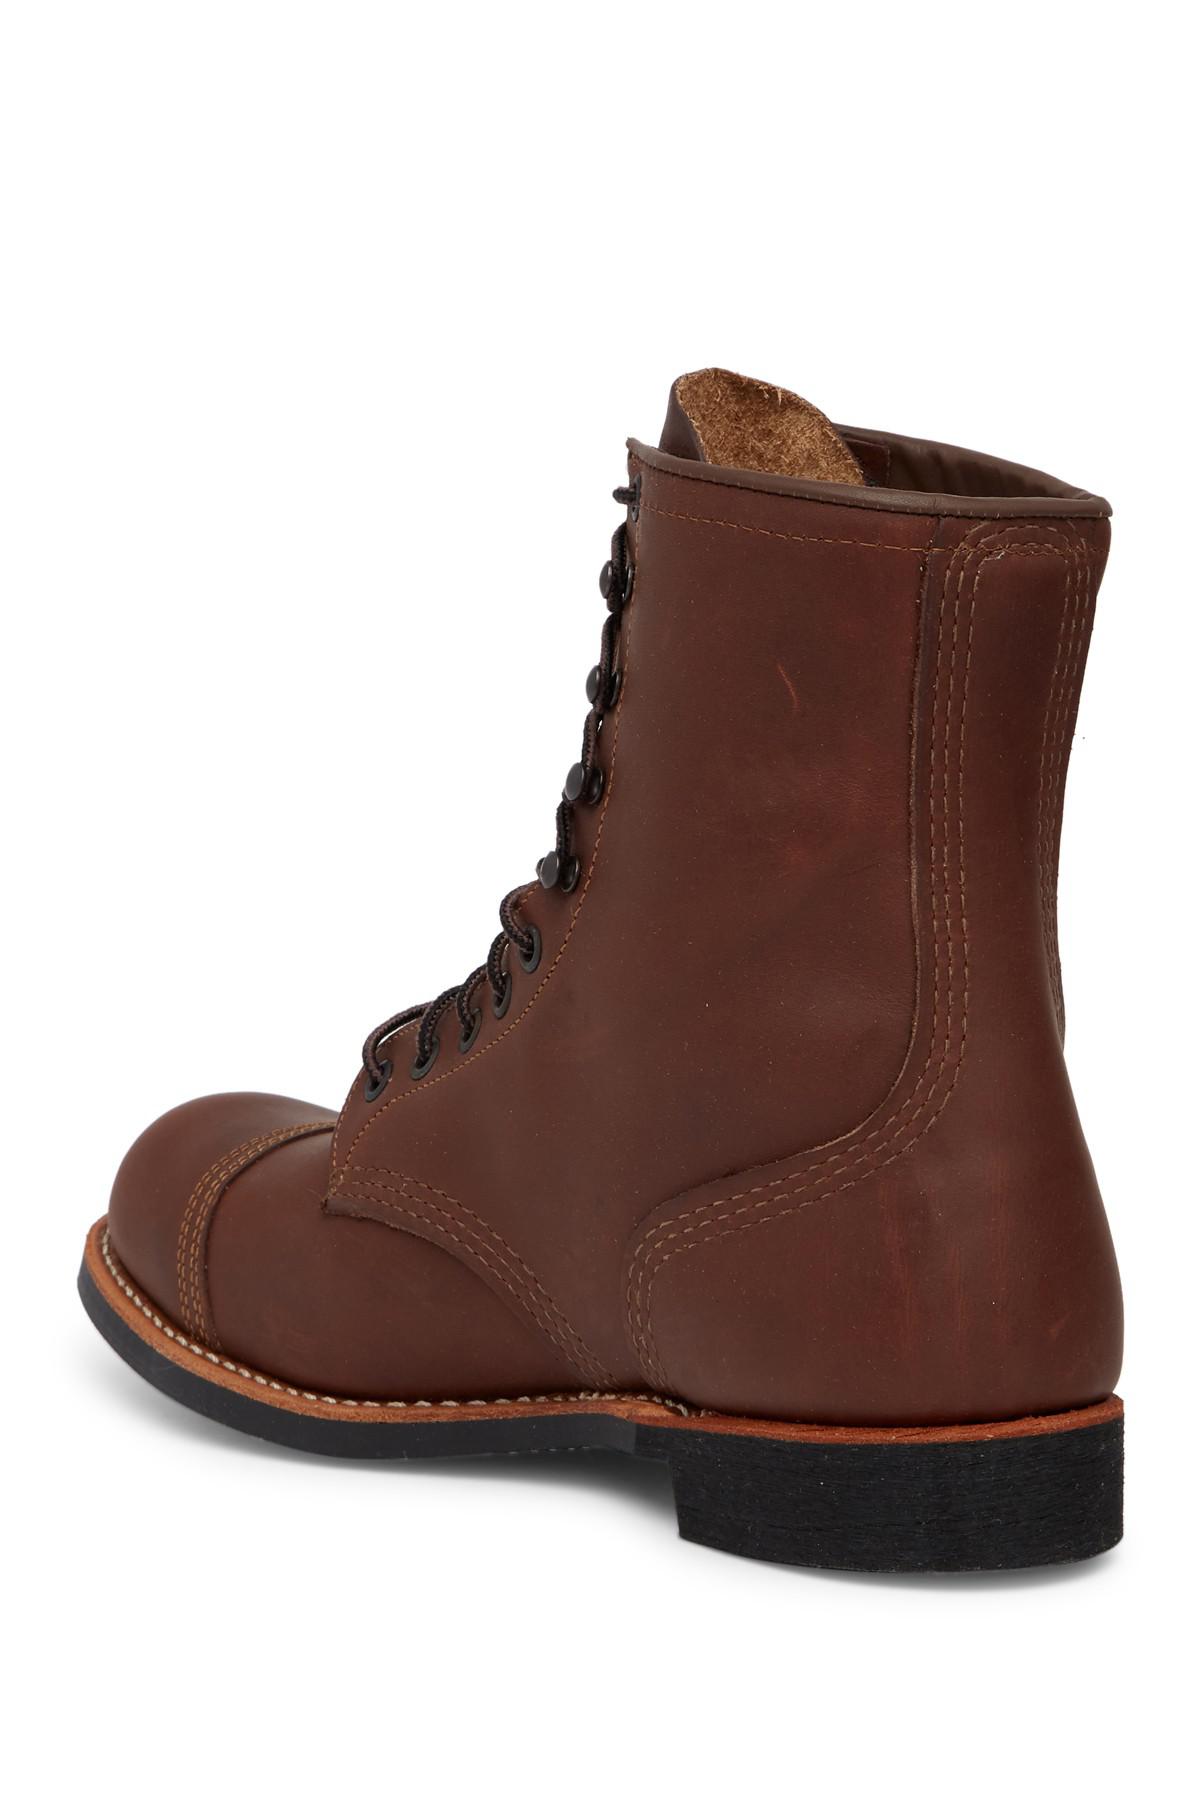 red wing cap toe boots